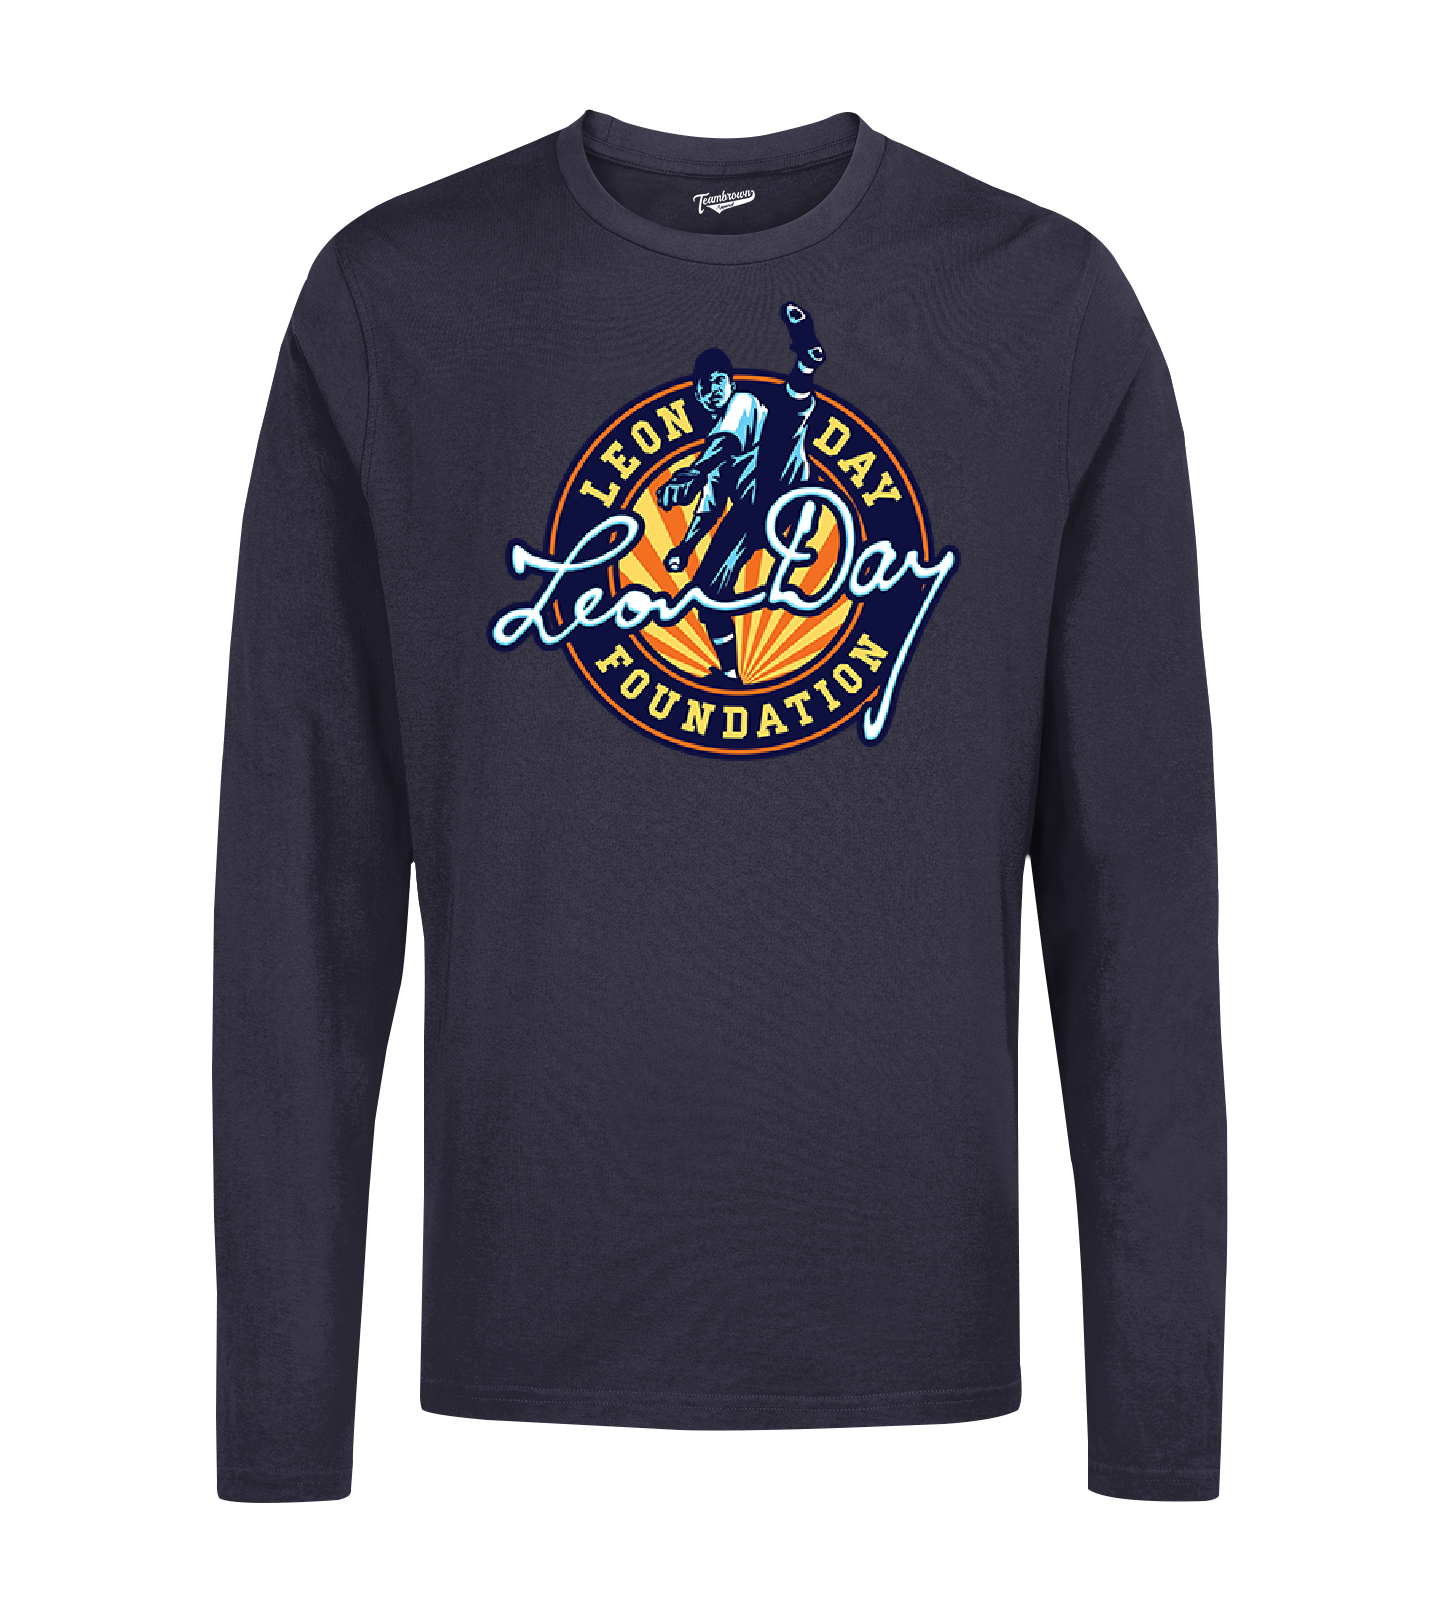 Leon Day Foundation - Unisex Long Sleeve Shirt | Officially Licensed - The Leon Day Foundation